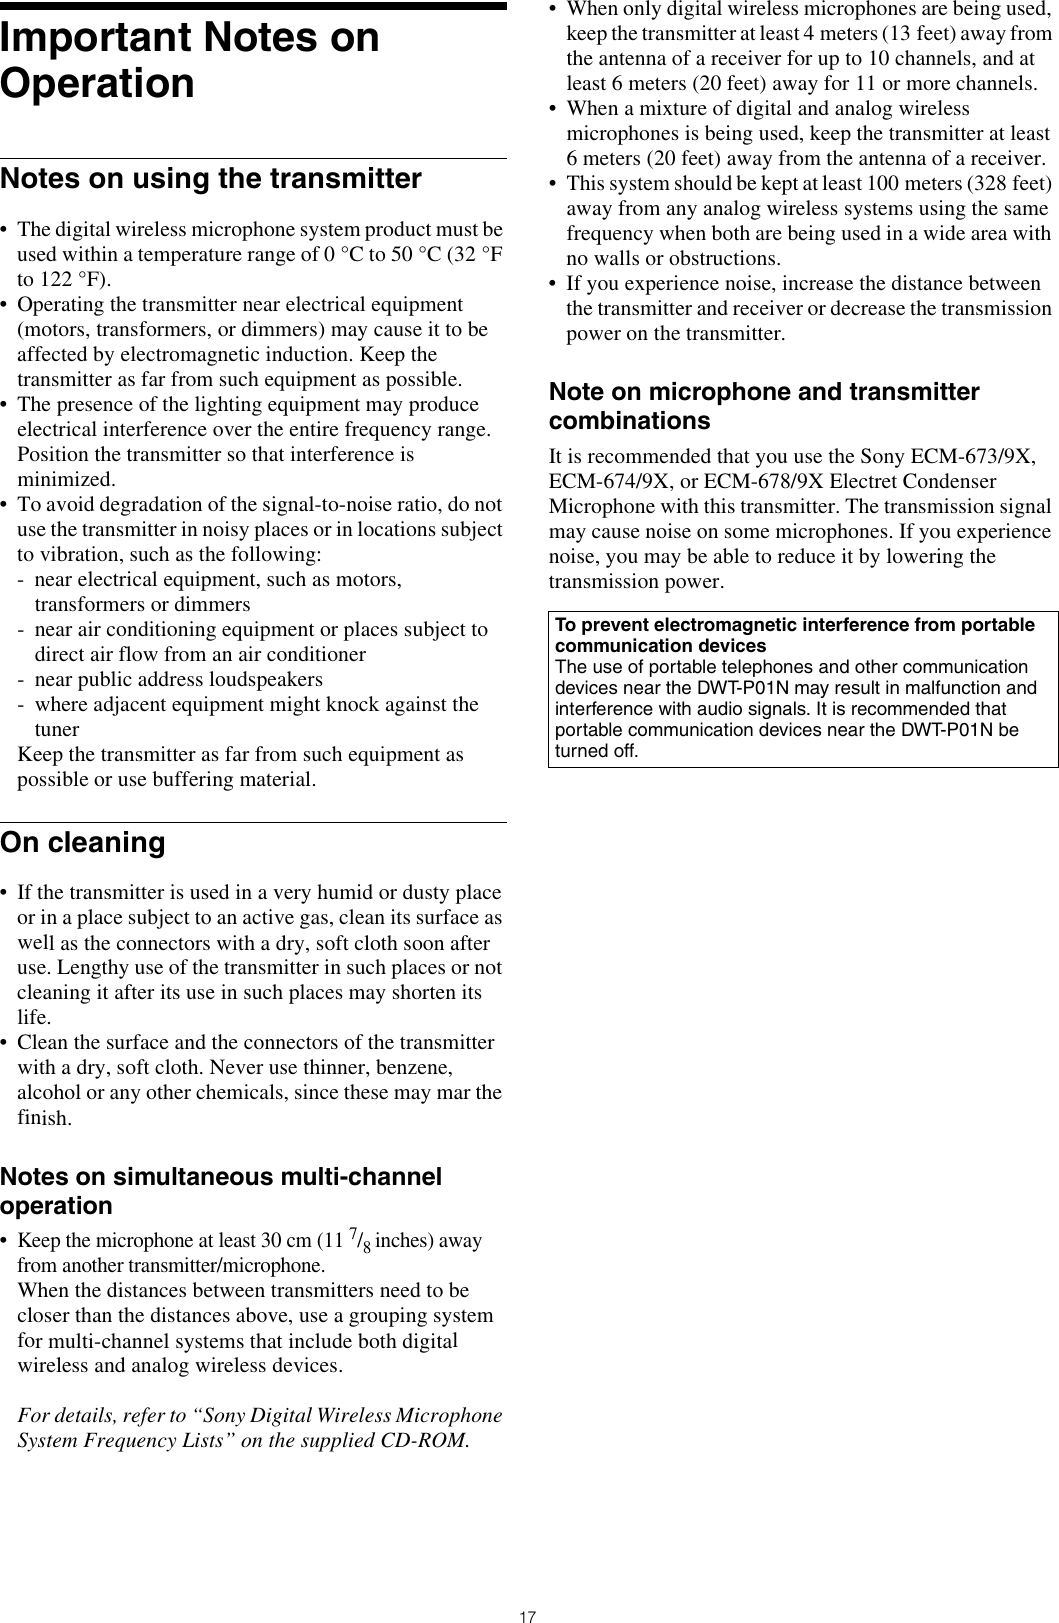 17Important Notes on OperationNotes on using the transmitter• The digital wireless microphone system product must be used within a temperature range of 0 °C to 50 °C (32 °Fto 122 °F).• Operating the transmitter near electrical equipment(motors, transformers, or dimmers) may cause it to beaffected by electromagnetic induction. Keep thetransmitter as far from such equipment as possible.• The presence of the lighting equipment may produceelectrical interference over the entire frequency range.Position the transmitter so that interference isminimized.• To avoid degradation of the signal-to-noise ratio, do notuse the transmitter in noisy places or in locations subjectto vibration, such as the following:- near electrical equipment, such as motors,transformers or dimmers- near air conditioning equipment or places subject todirect air flow from an air conditioner- near public address loudspeakers- where adjacent equipment might knock against thetunerKeep the transmitter as far from such equipment as possible or use buffering material.On cleaning• If the transmitter is used in a very humid or dusty placeor in a place subject to an active gas, clean its surface aswell as the connectors with a dry, soft cloth soon afteruse. Lengthy use of the transmitter in such places or notcleaning it after its use in such places may shorten itslife.• Clean the surface and the connectors of the transmitterwith a dry, soft cloth. Never use thinner, benzene,alcohol or any other chemicals, since these may mar thefinish.Notes on simultaneous multi-channel operation•Keep the microphone at least 30 cm (11 7/8 inches) awayfrom another transmitter/microphone.When the distances between transmitters need to becloser than the distances above, use a grouping systemfor multi-channel systems that include both digitalwireless and analog wireless devices.For details, refer to “Sony Digital Wireless MicrophoneSystem Frequency Lists” on the supplied CD-ROM.• When only digital wireless microphones are being used,keep the transmitter at least 4 meters (13 feet) away fromthe antenna of a receiver for up to 10 channels, and atleast 6 meters (20 feet) away for 11 or more channels.• When a mixture of digital and analog wirelessmicrophones is being used, keep the transmitter at least6 meters (20 feet) away from the antenna of a receiver.• This system should be kept at least 100 meters (328 feet)away from any analog wireless systems using the samefrequency when both are being used in a wide area withno walls or obstructions.• If you experience noise, increase the distance betweenthe transmitter and receiver or decrease the transmissionpower on the transmitter.Note on microphone and transmitter combinationsIt is recommended that you use the Sony ECM-673/9X, ECM-674/9X, or ECM-678/9X Electret Condenser Microphone with this transmitter. The transmission signal may cause noise on some microphones. If you experience noise, you may be able to reduce it by lowering the transmission power.To prevent electromagnetic interference from portable communication devicesThe use of portable telephones and other communication devices near the DWT-P01N may result in malfunction and interference with audio signals. It is recommended that portable communication devices near the DWT-P01N be turned off.